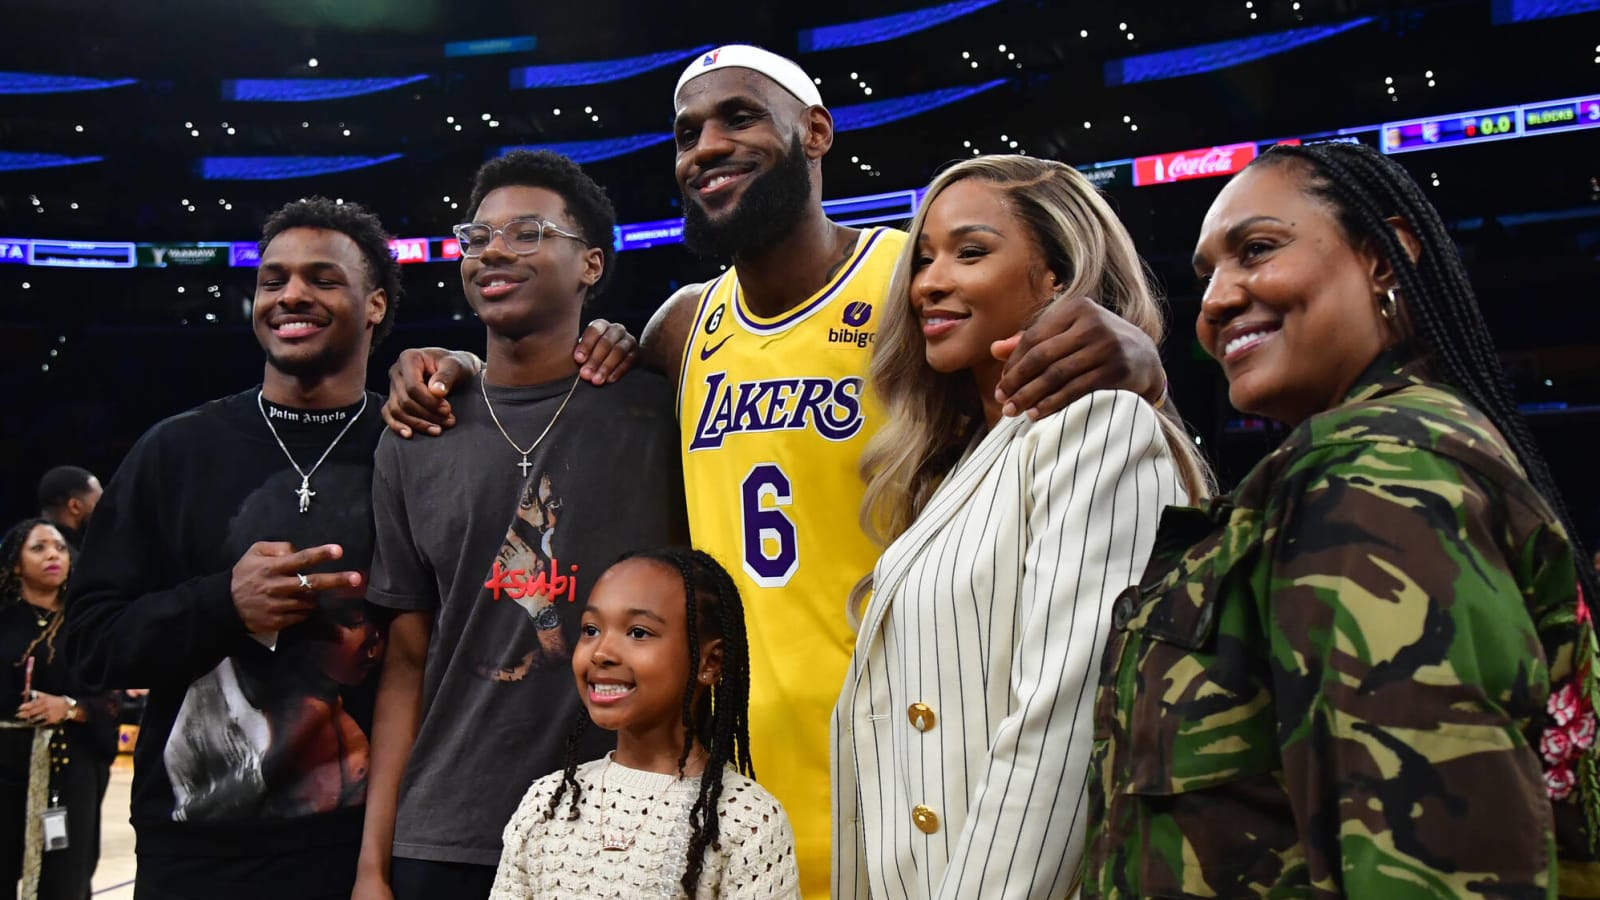 LeBron James Brought Family And Friends From Akron To Watch Potential Record-Setting Game